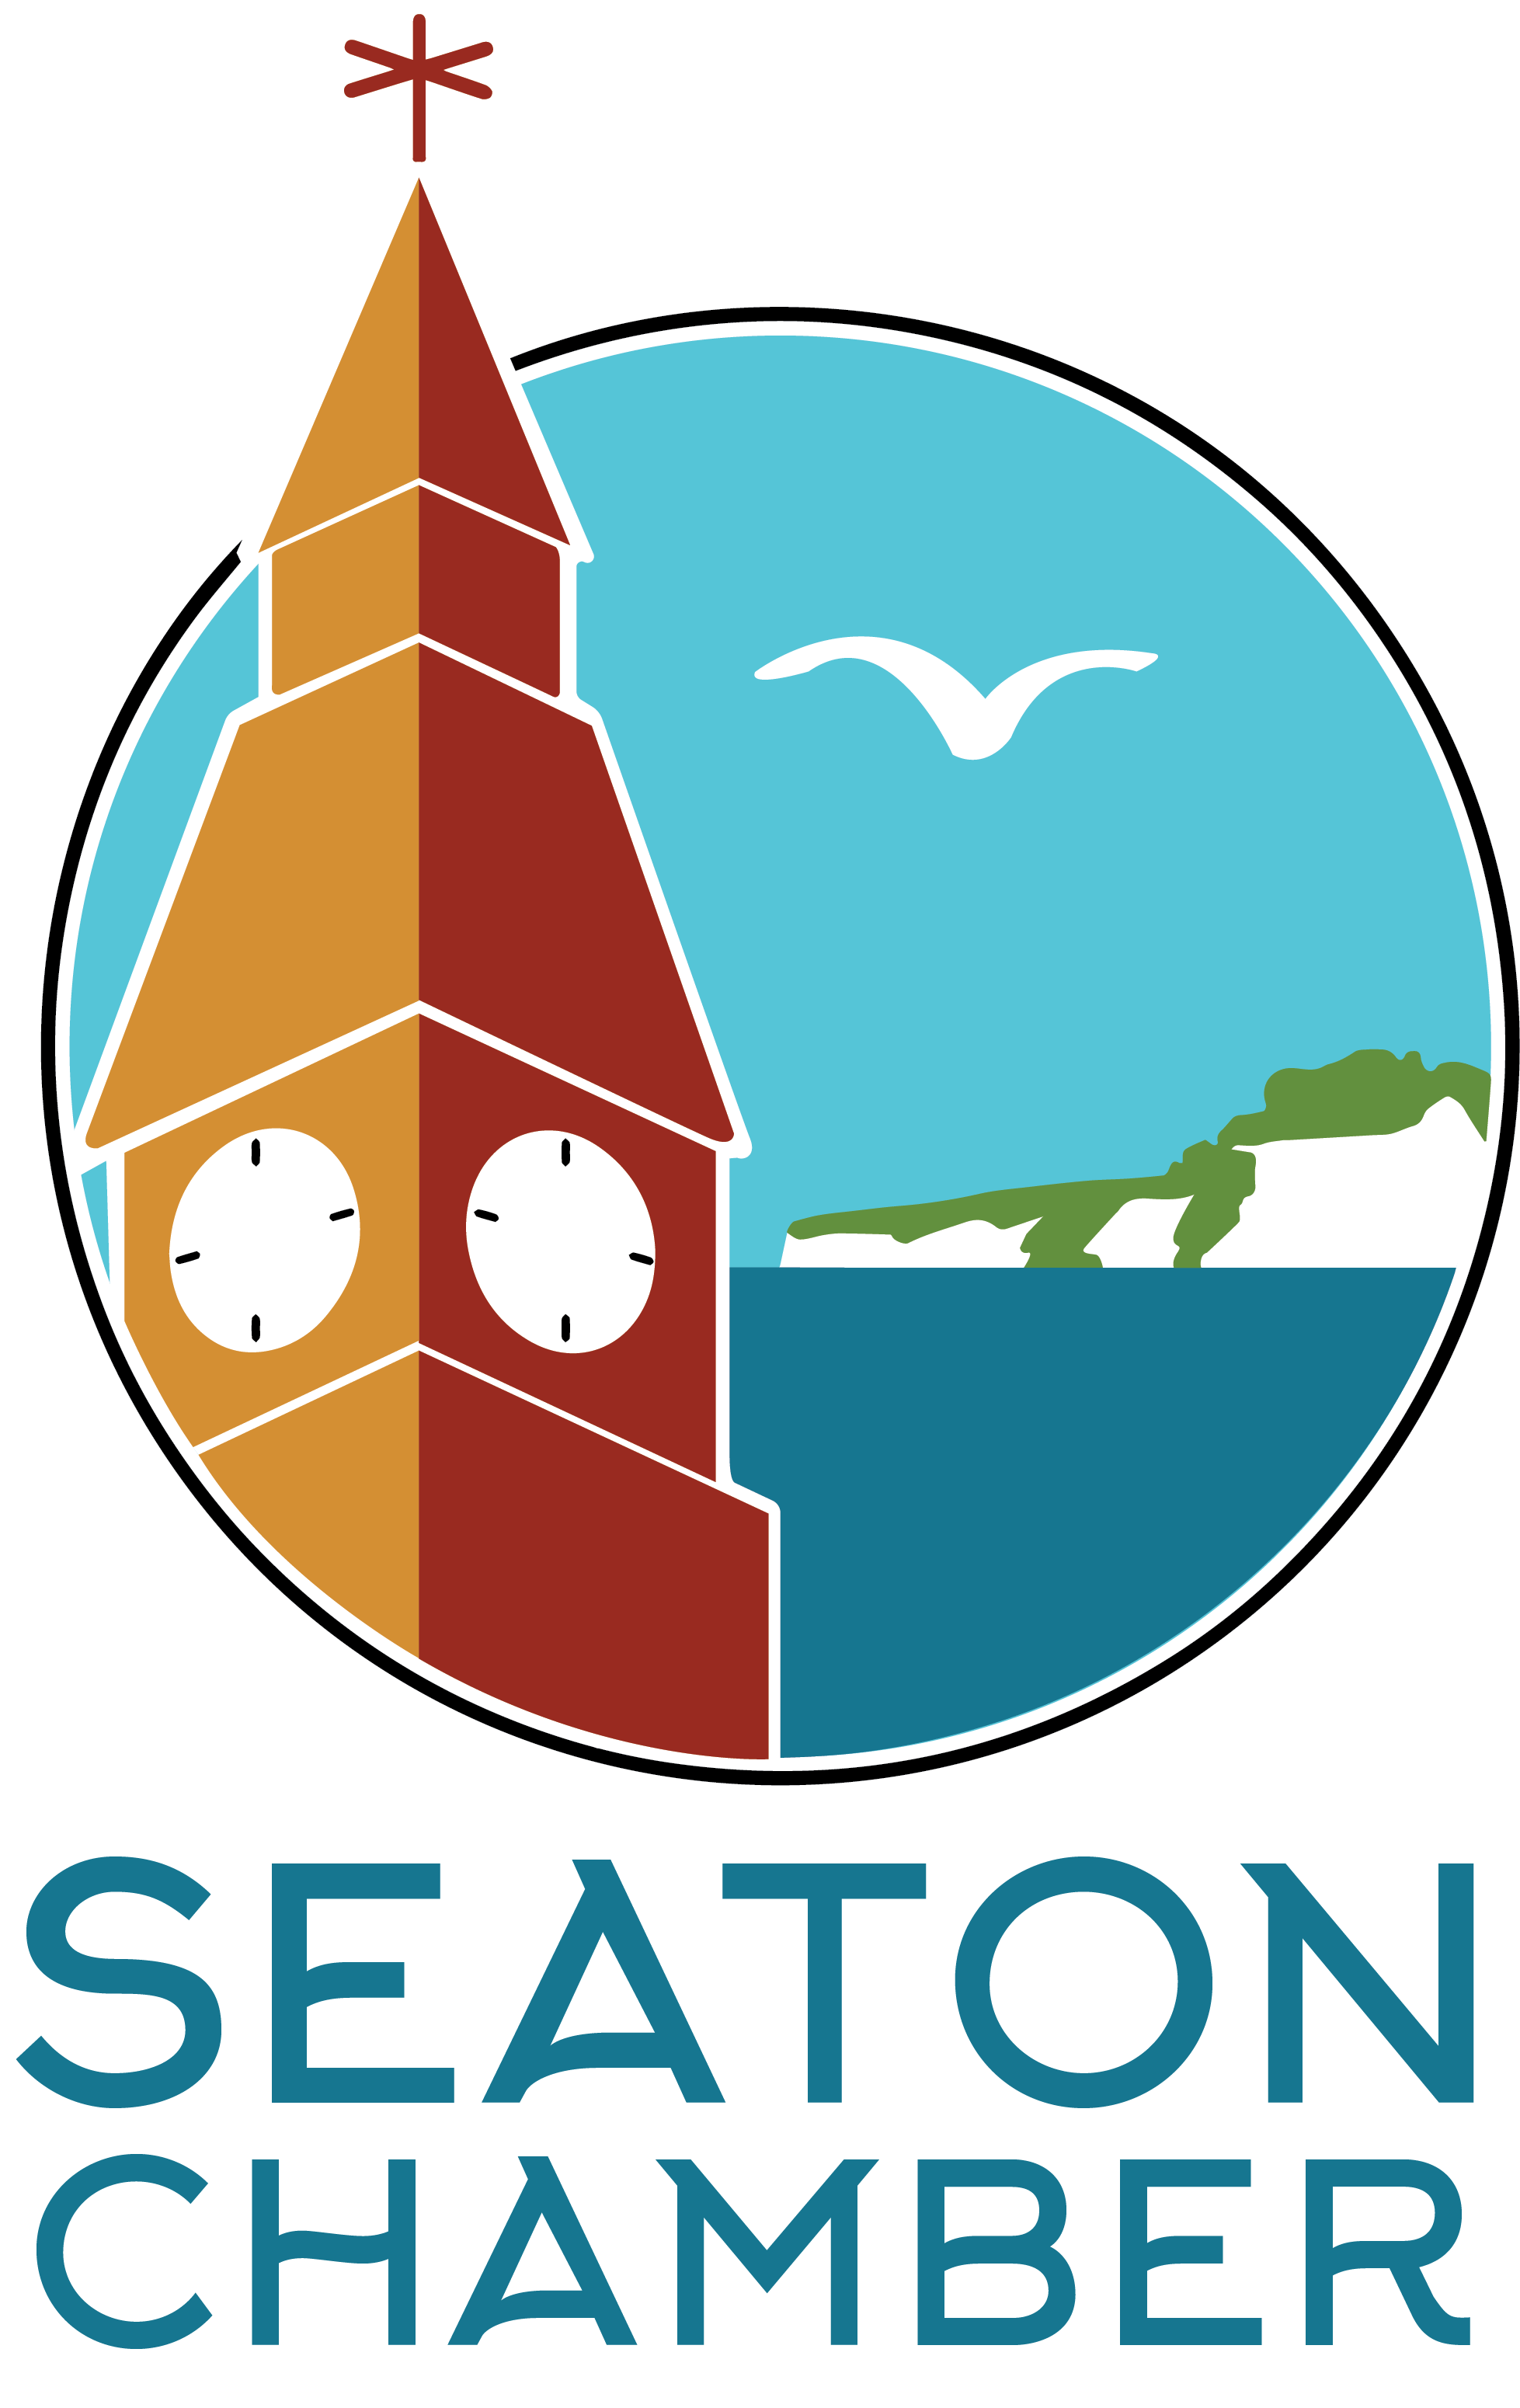 the Seaton Chamber logo shows the white chalk cliffs, red sandstone and blue Iias rock that make up the Jurassic coast. Only in Seaton can all 3 rock types be seen together. The logo exemplifies hit s in its colours, and represents Seaton Devon's independent businesses and community.